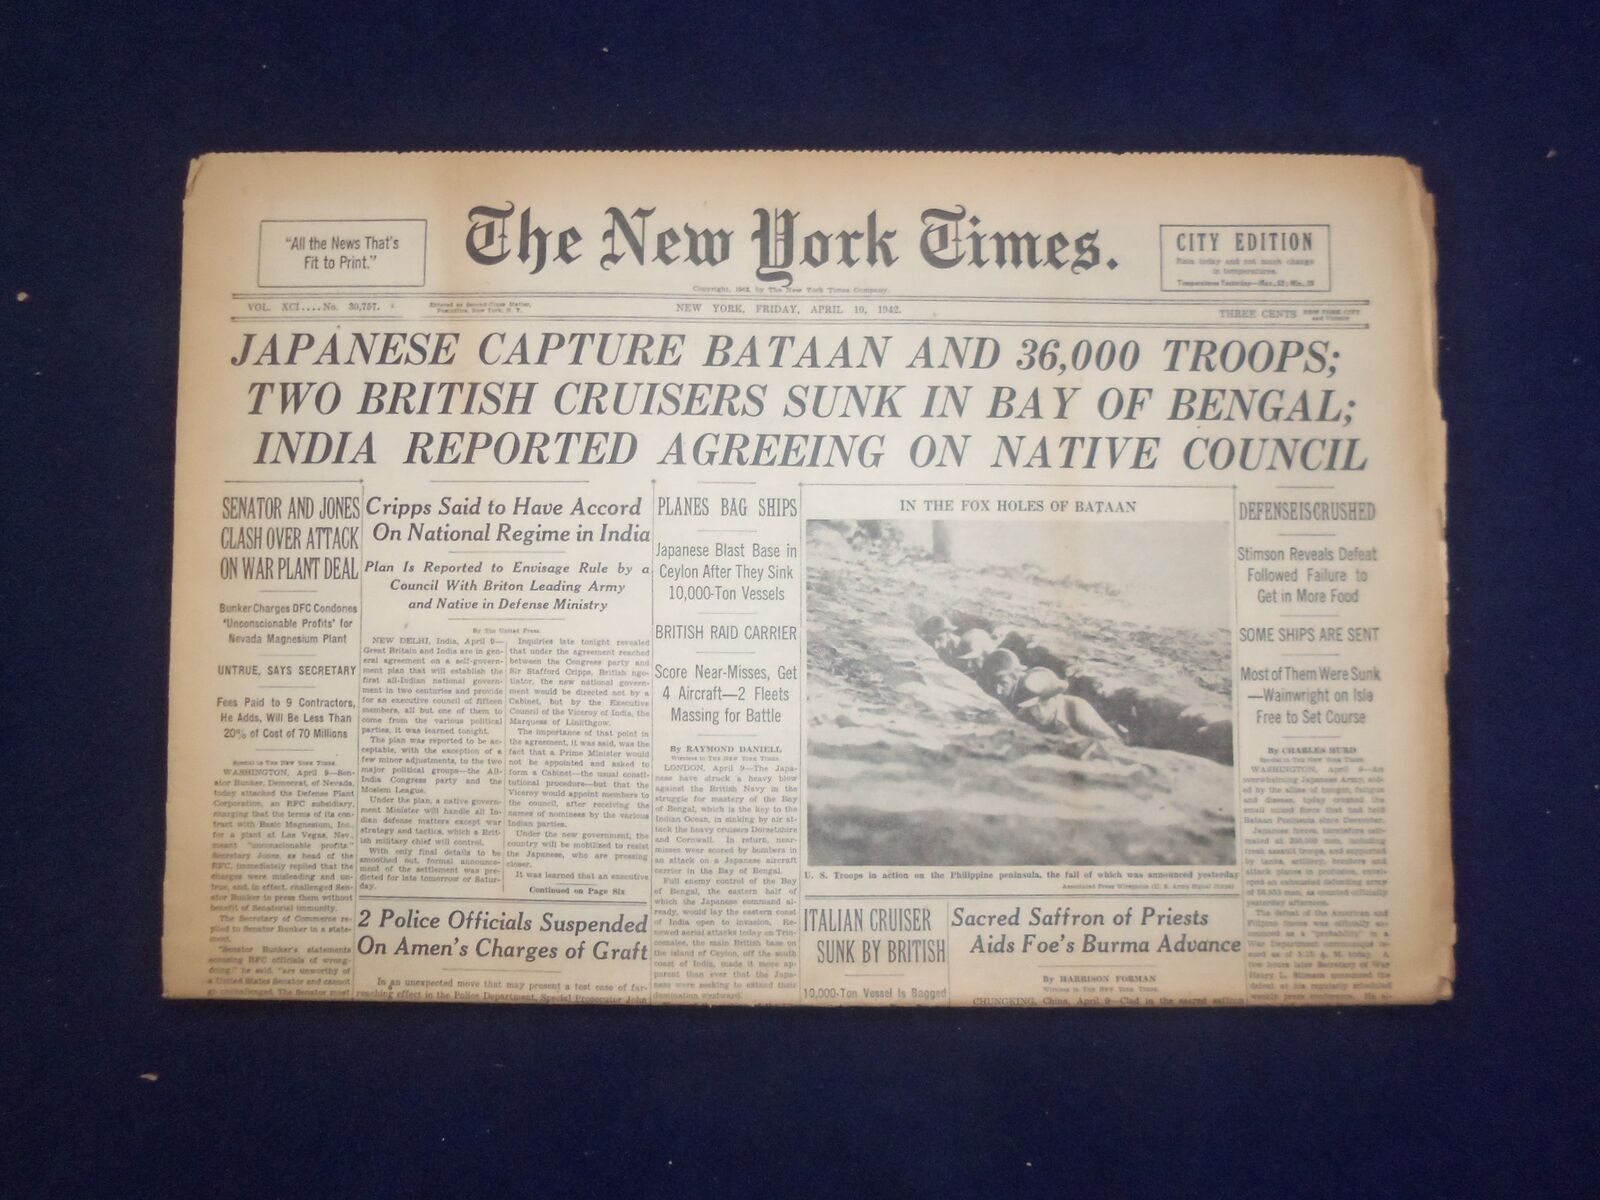 1943 APR 10 NEW YORK TIMES - JAPANESE CAPTURE BATAAN AND 36,000 TROOPS - NP 6530